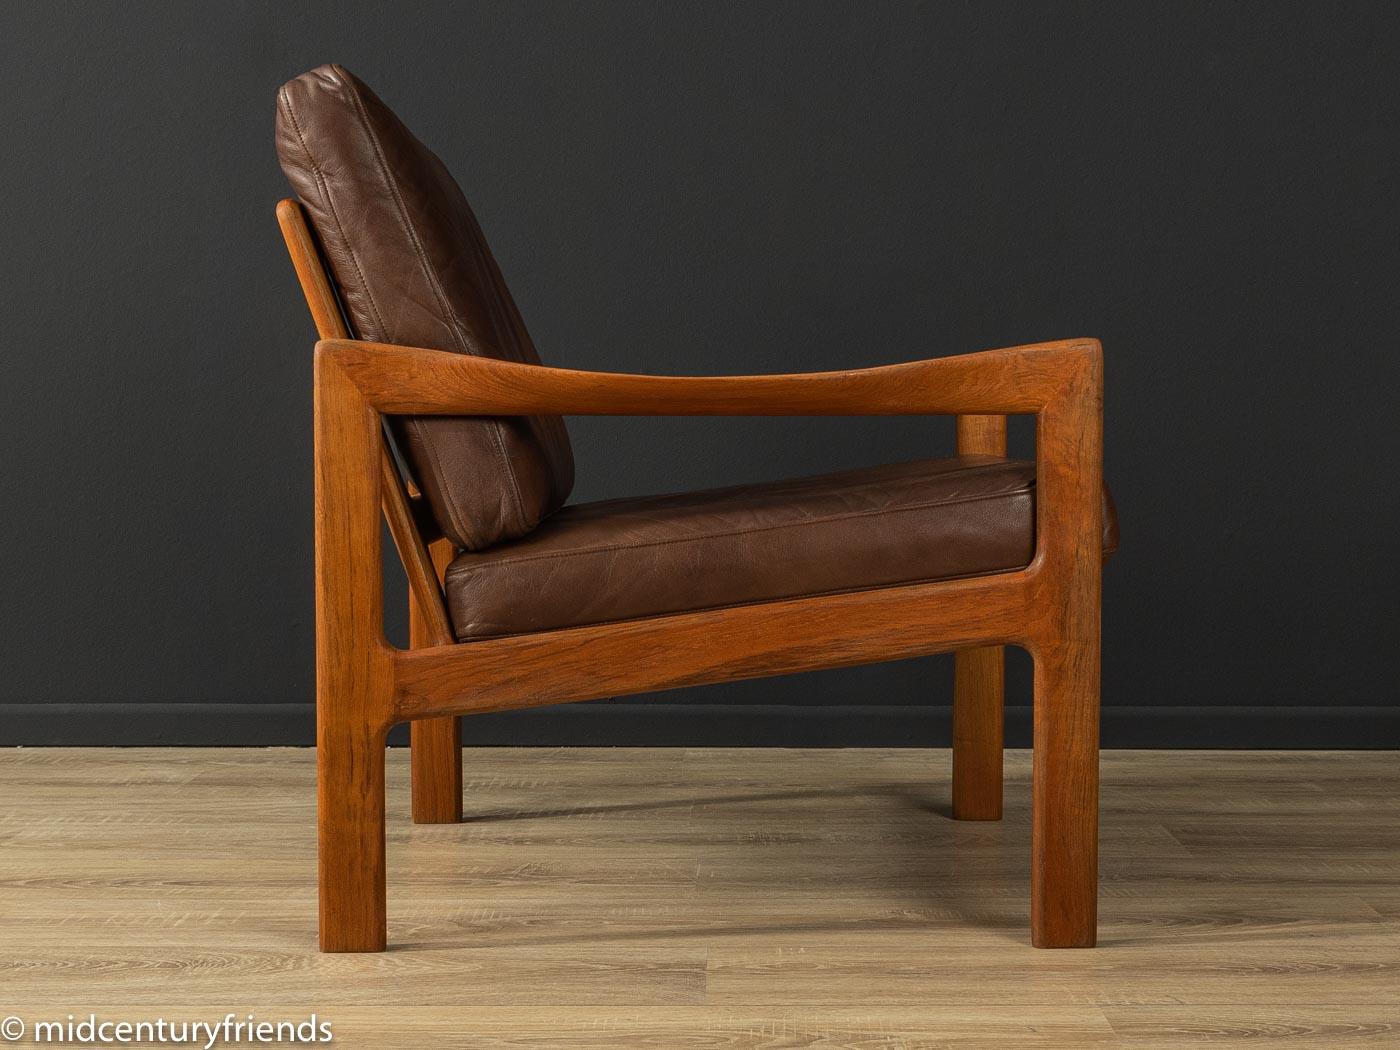 Classic armchair from the 1960s. High-quality frame made of solid teak with the high-quality original leather cover in brown.

Quality Features:
- accomplished design: perfect proportions and visible attention to detail
- high-quality